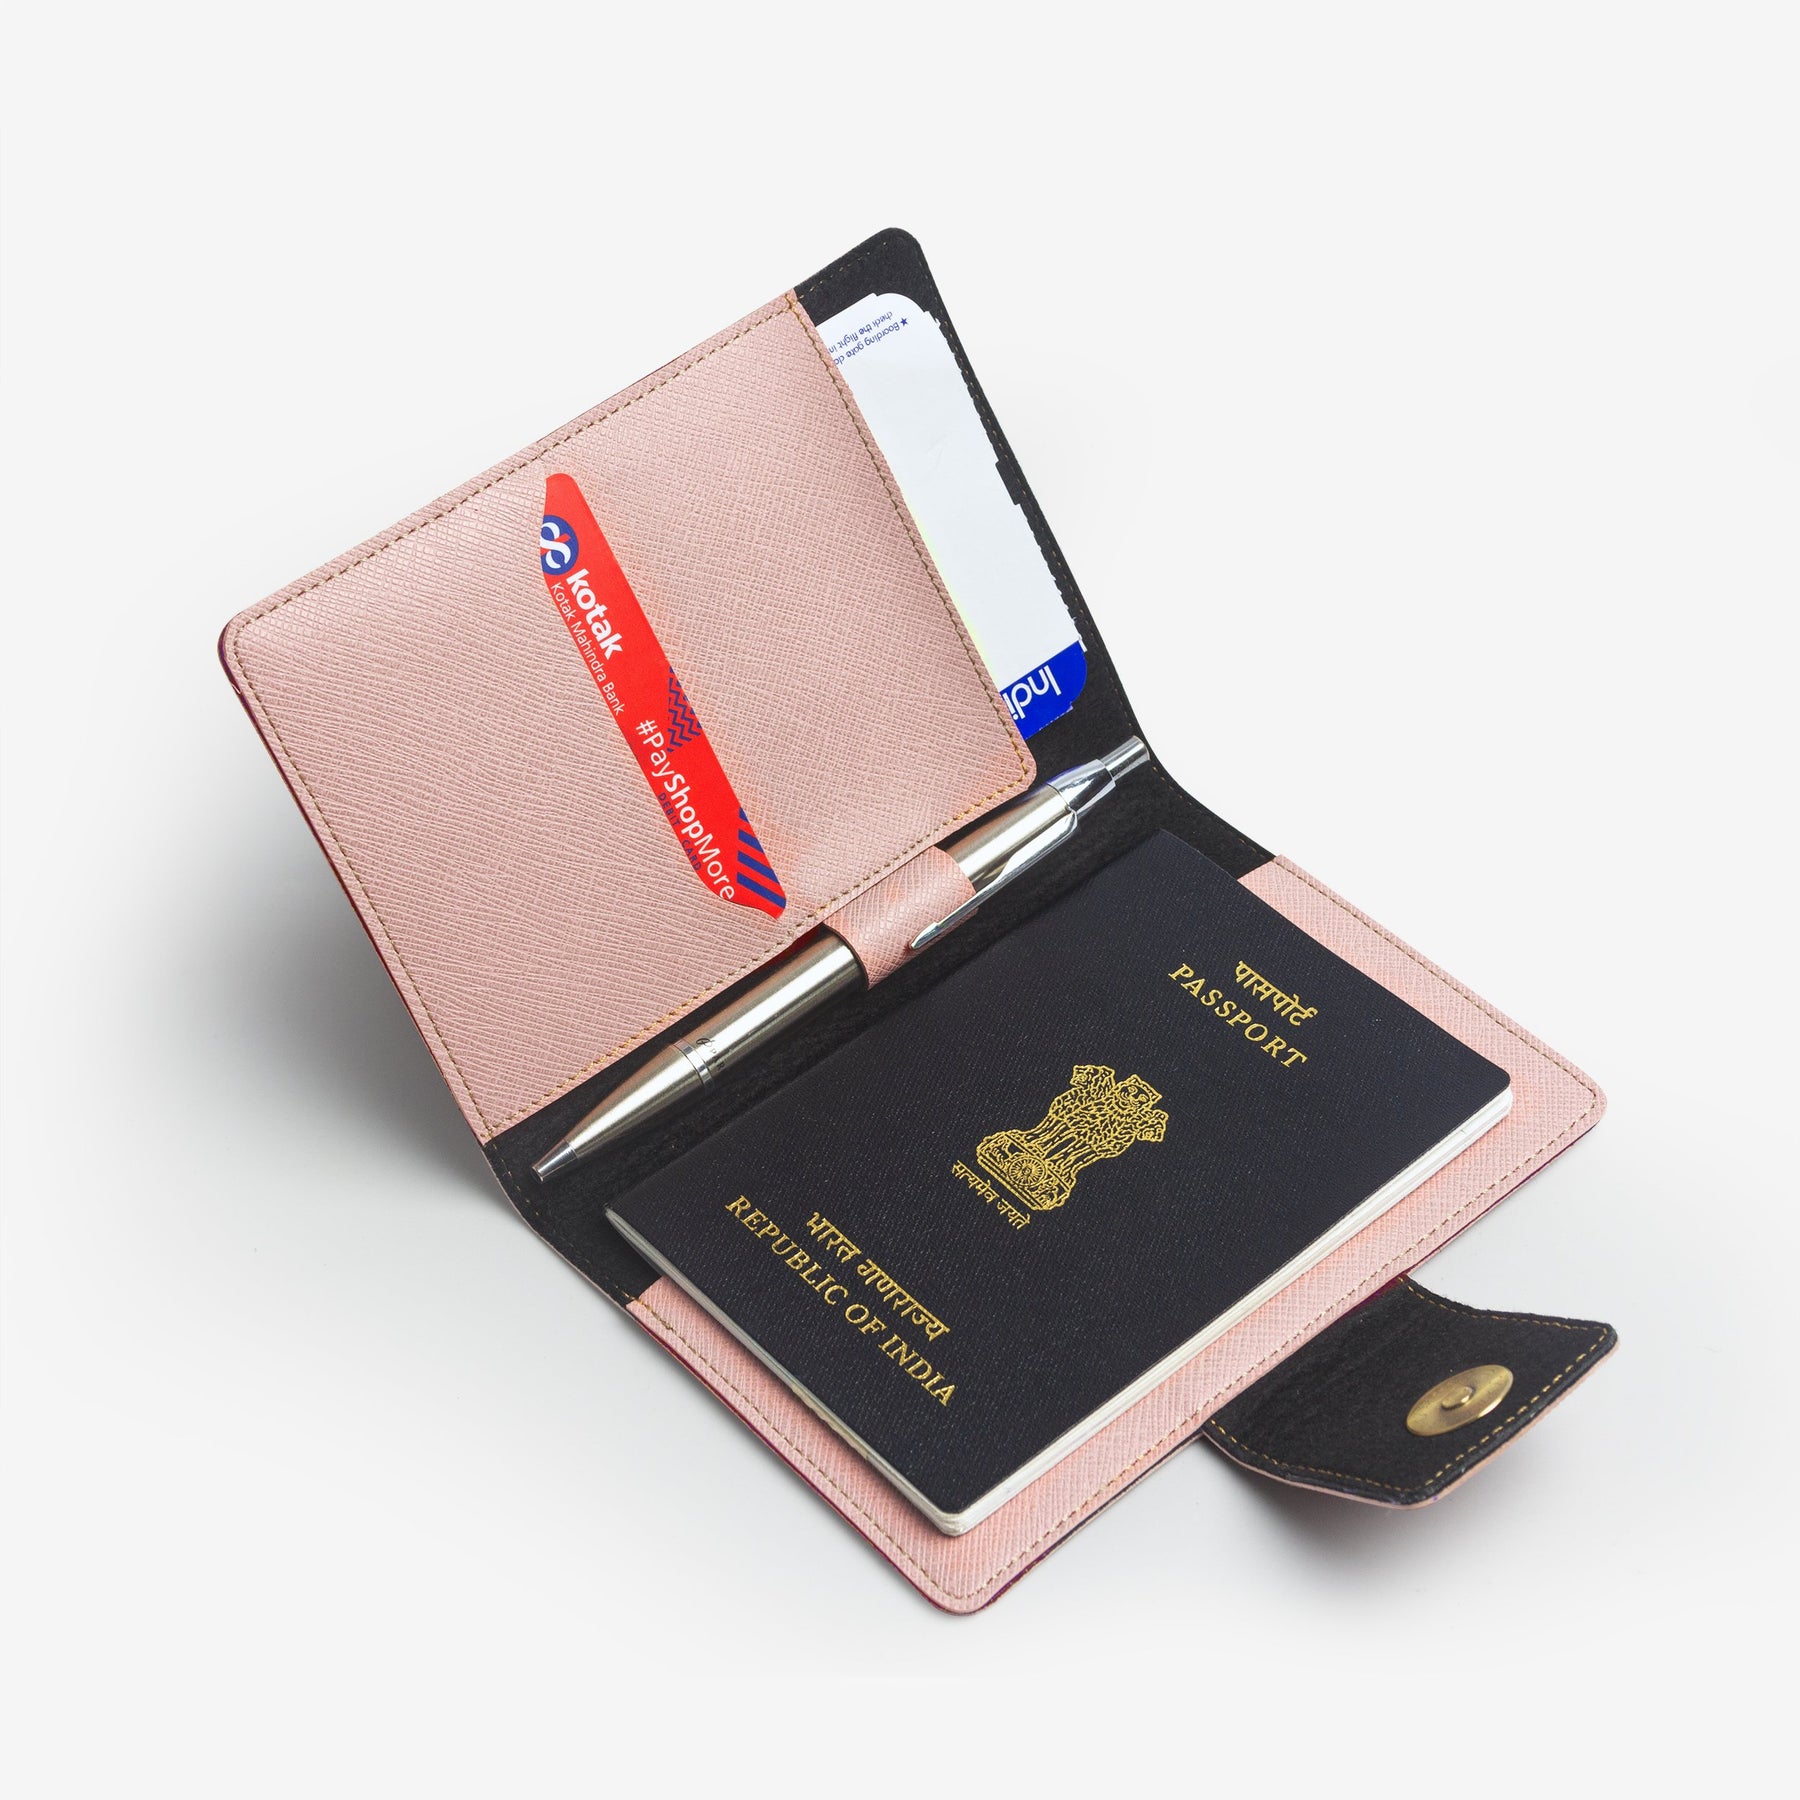 The Messy Corner Mini Travel Wallet Passport cover with button - Salmon Pink